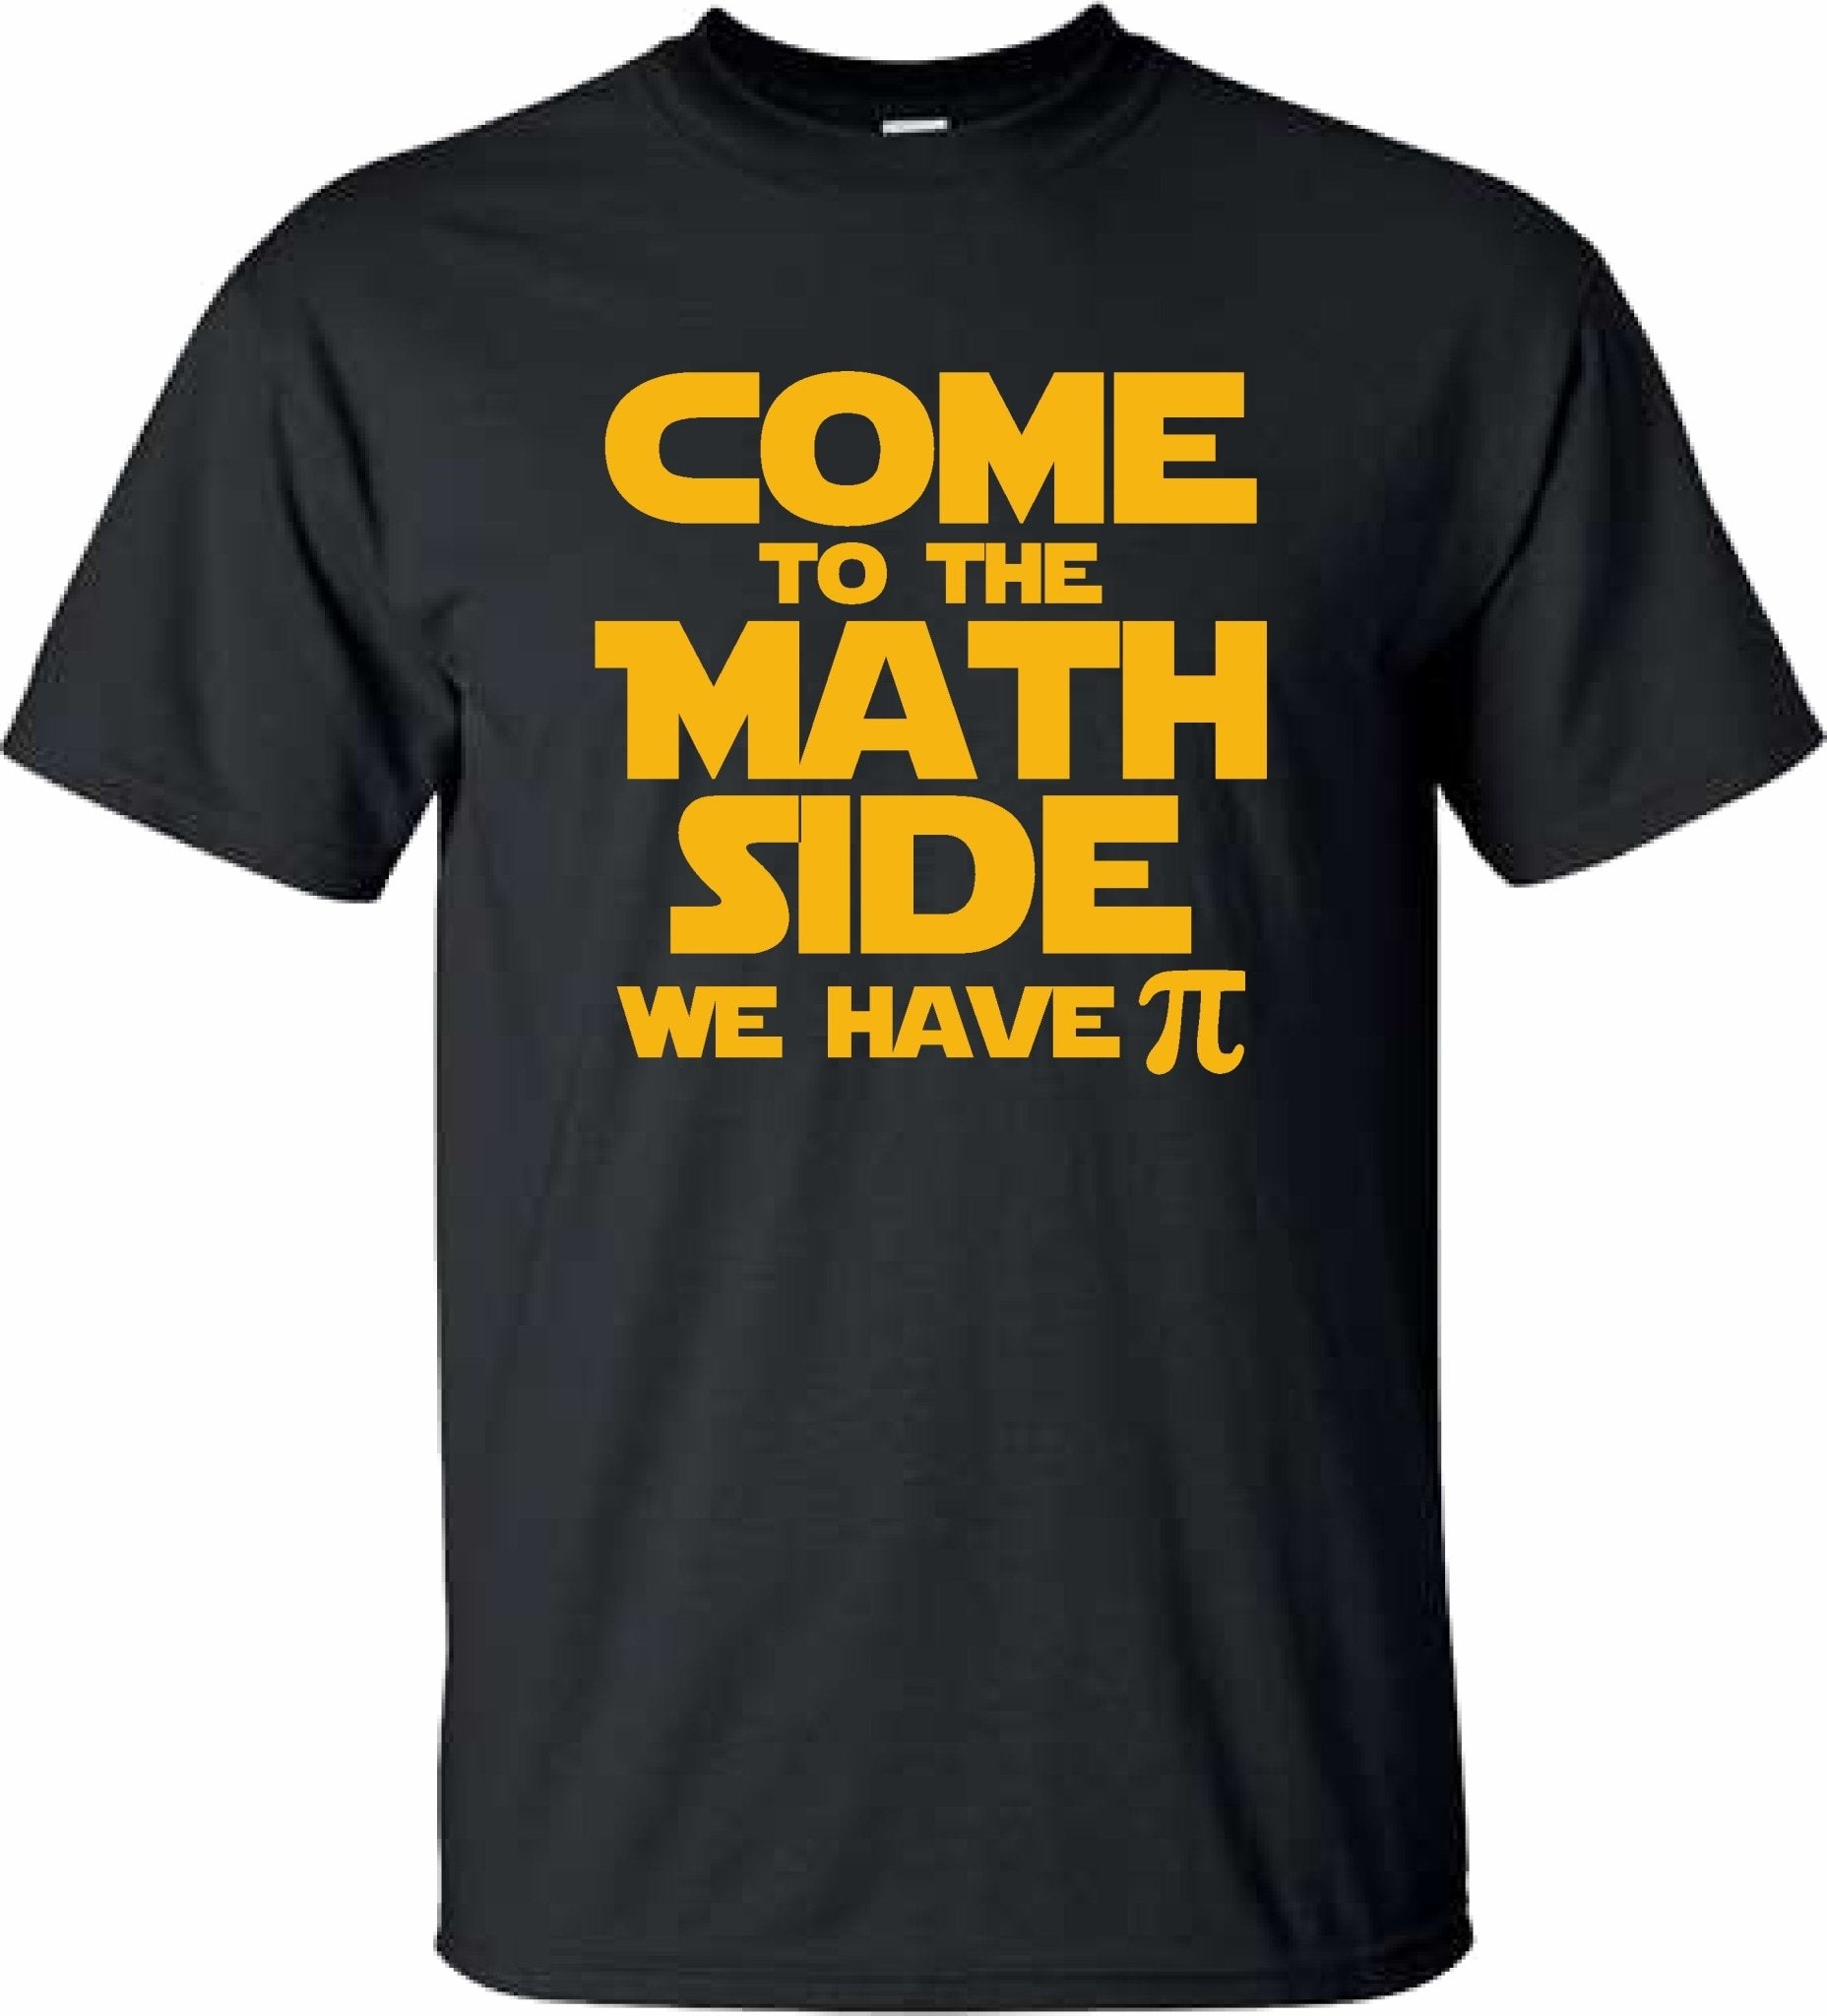 Come to the Math Side we have Pi T shirt (Youth or Adult) - SBS T Shop